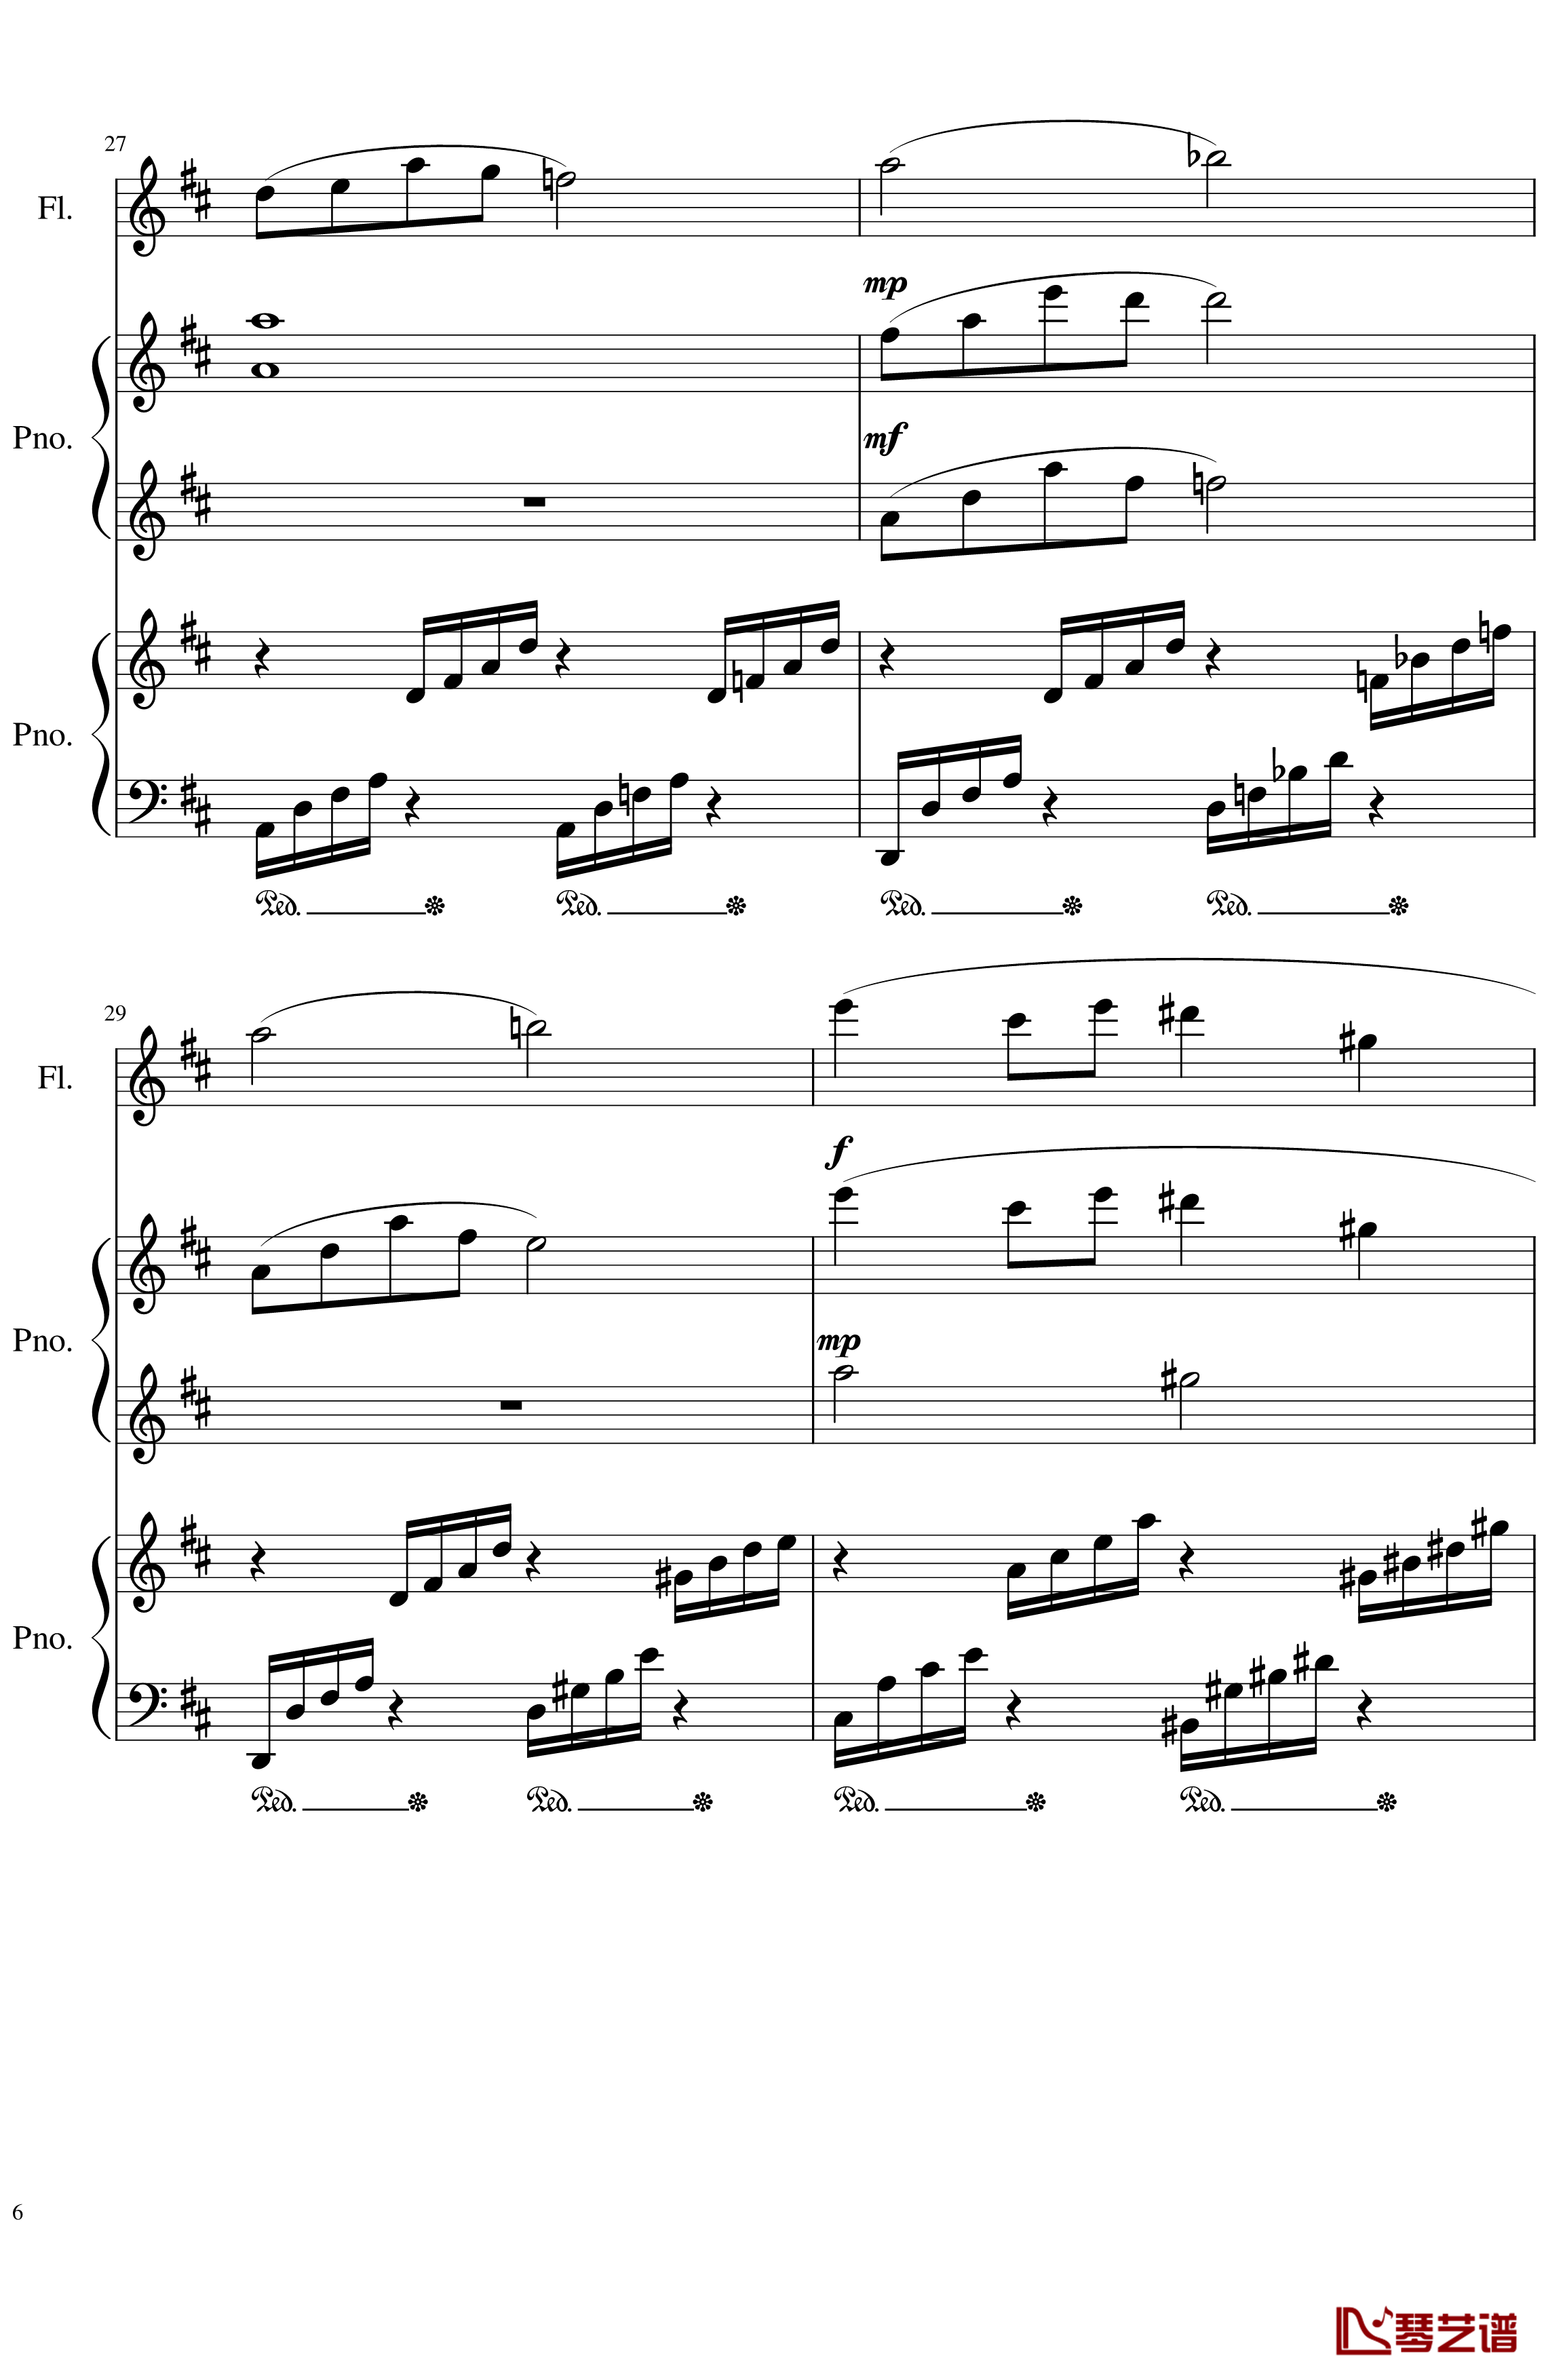 Clair de lune, Op.109b 钢琴谱-Version for two pianos and flute in D Major-一个球